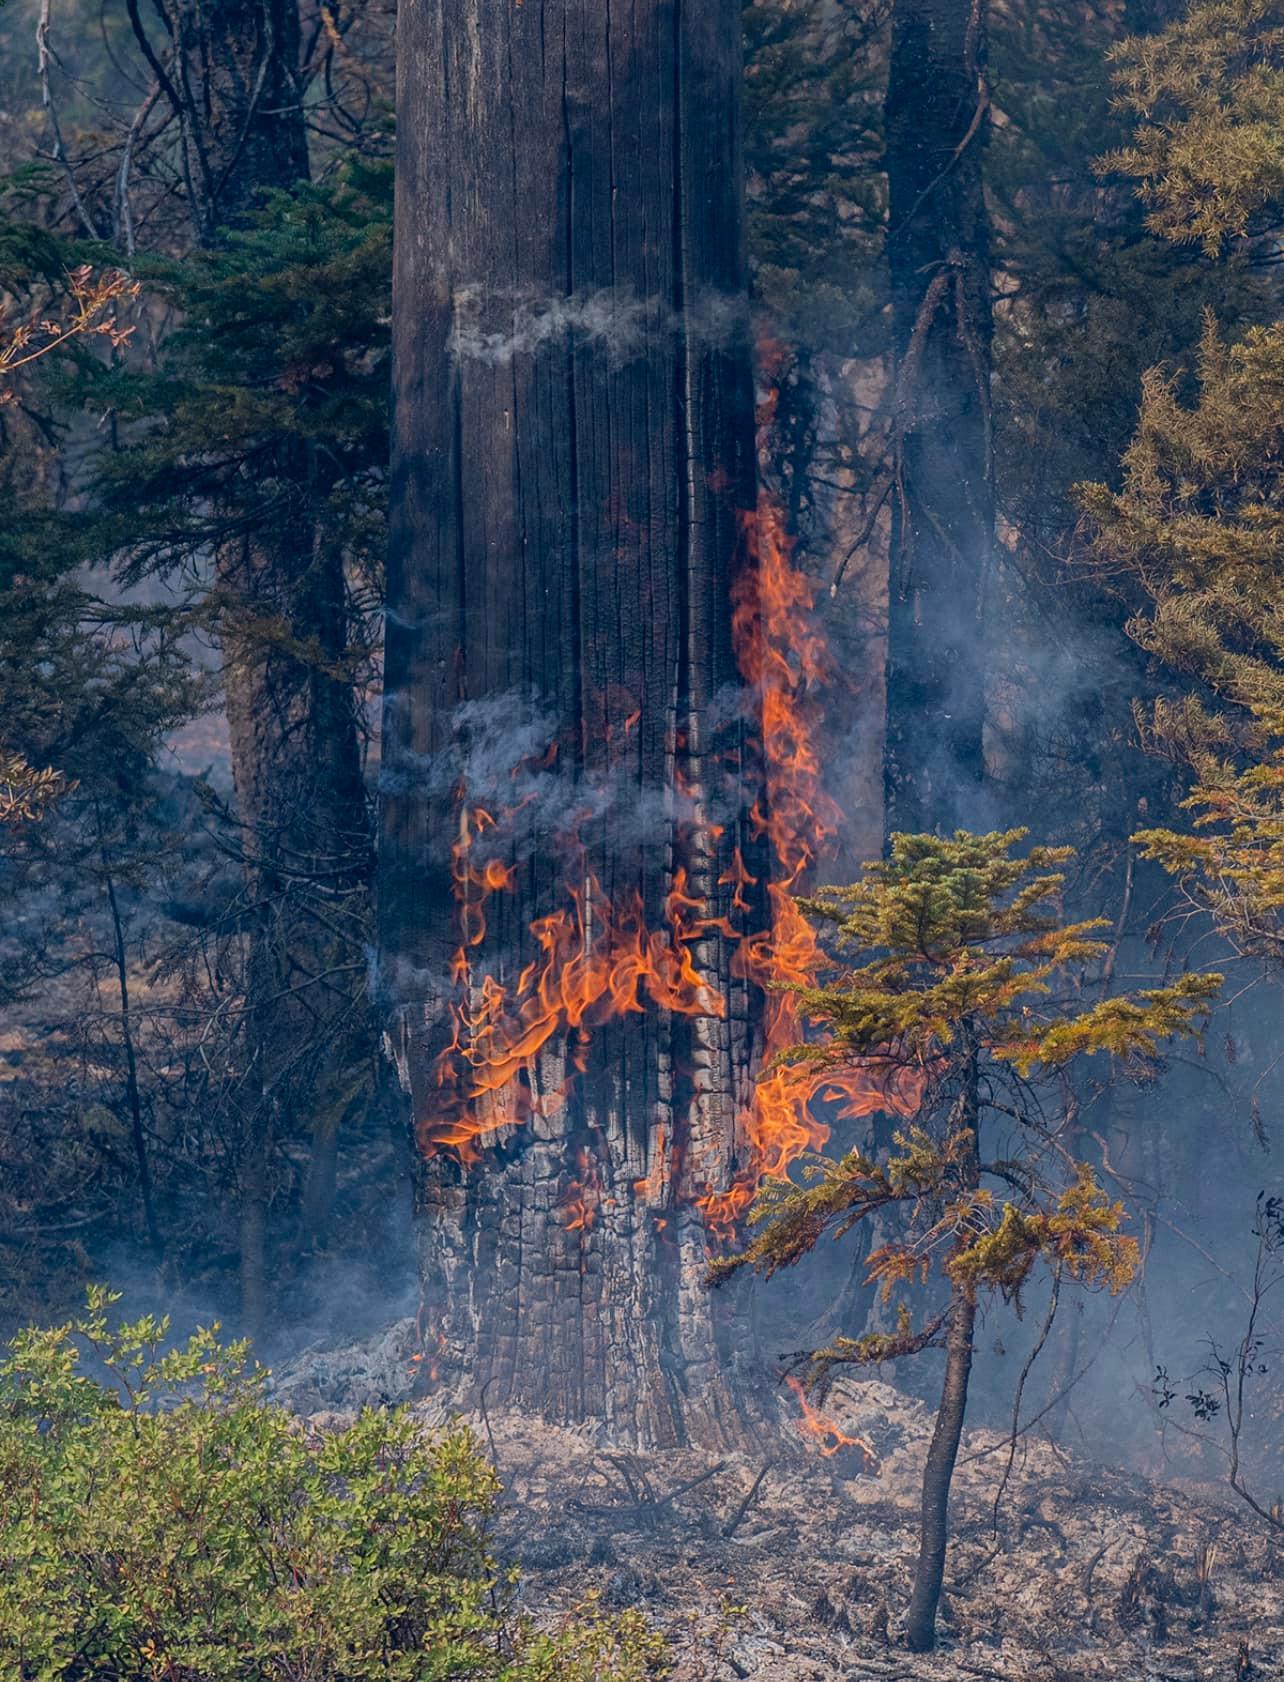 A large tree in the forest has orange flame slowly burning up the tree bark, turning the base of the tree black and white.